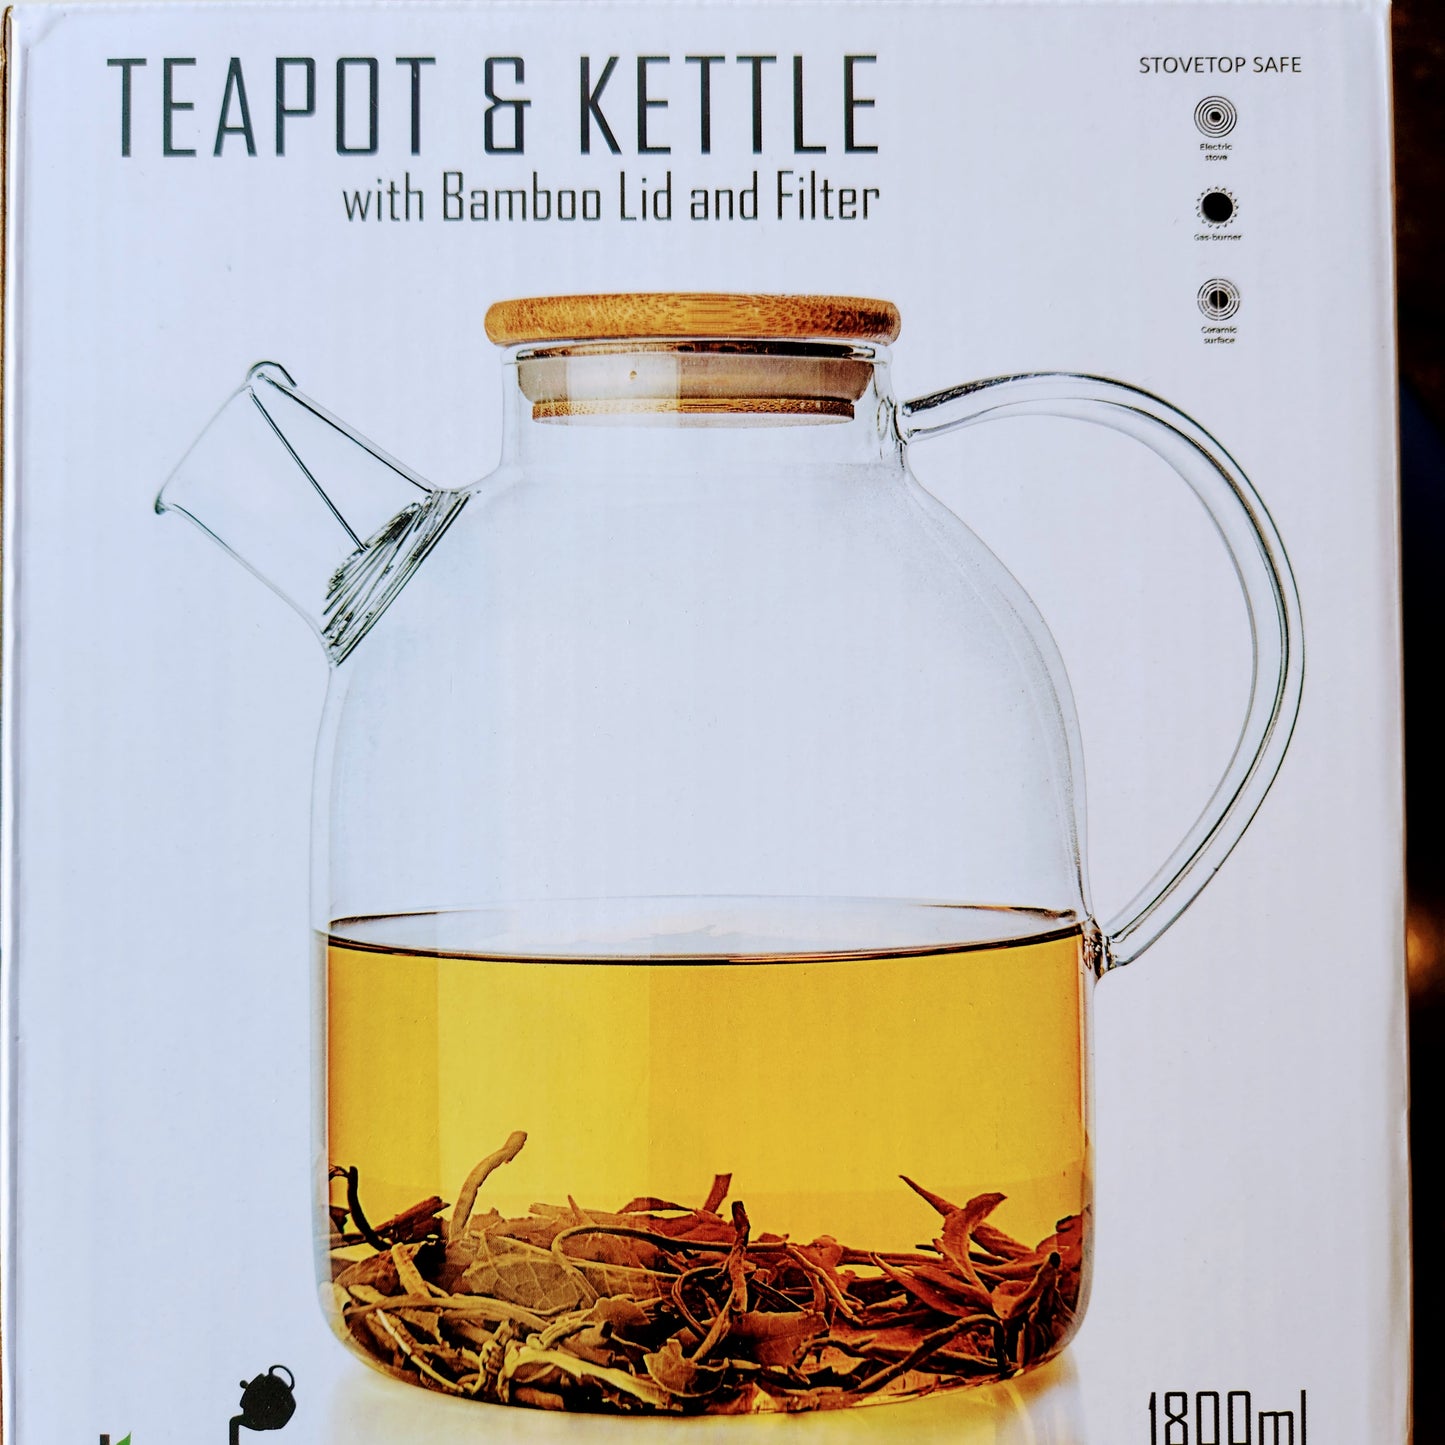 Glass Teapot and Kettle